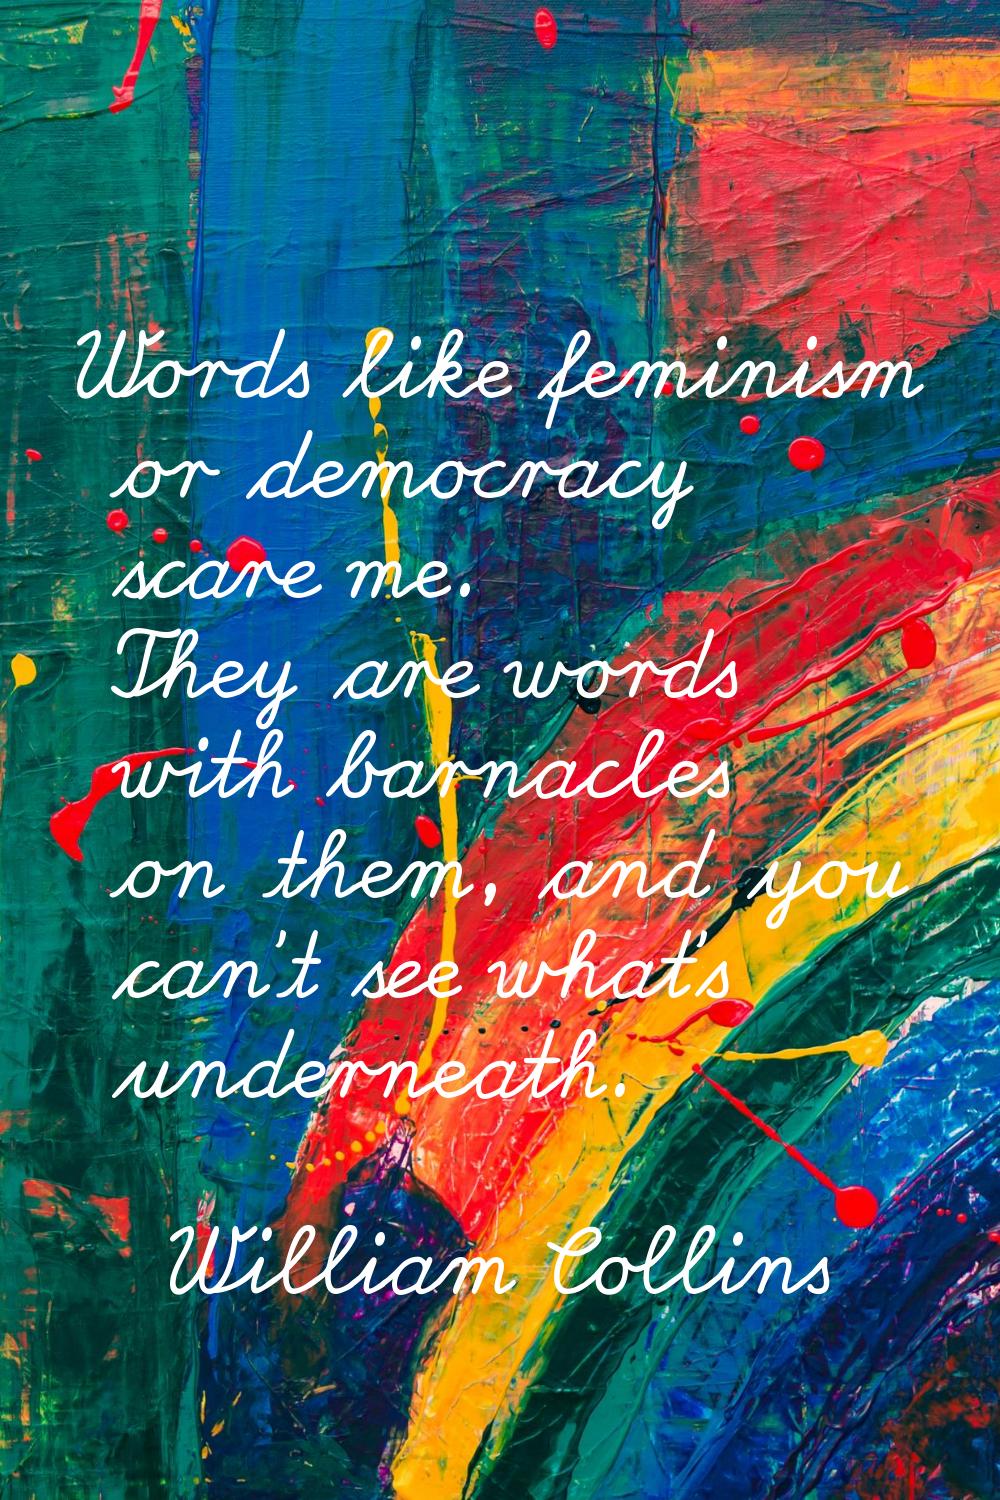 Words like feminism or democracy scare me. They are words with barnacles on them, and you can't see